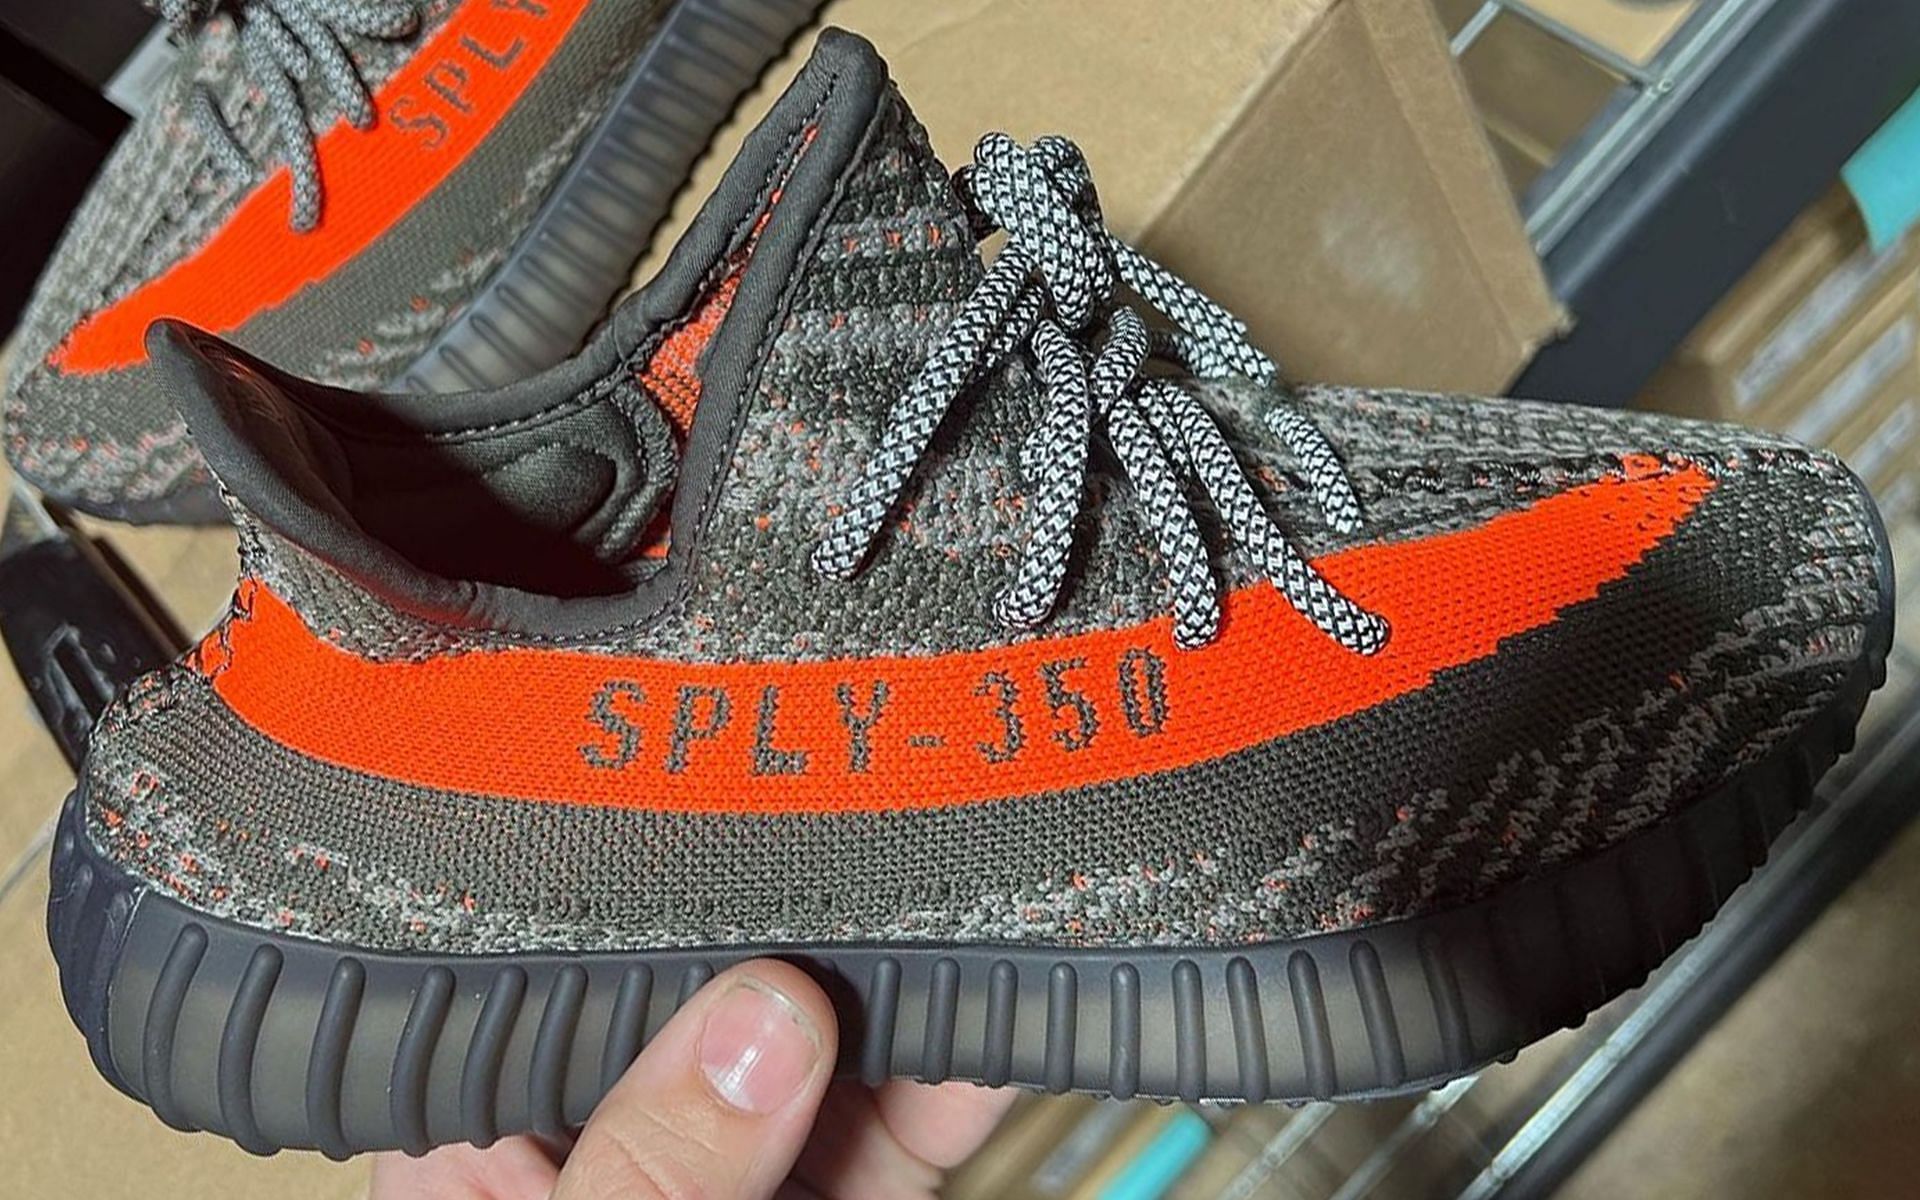 Where to buy Yeezy BOOST 350 V2 Dark Beluga shoes ? date, price and more explored